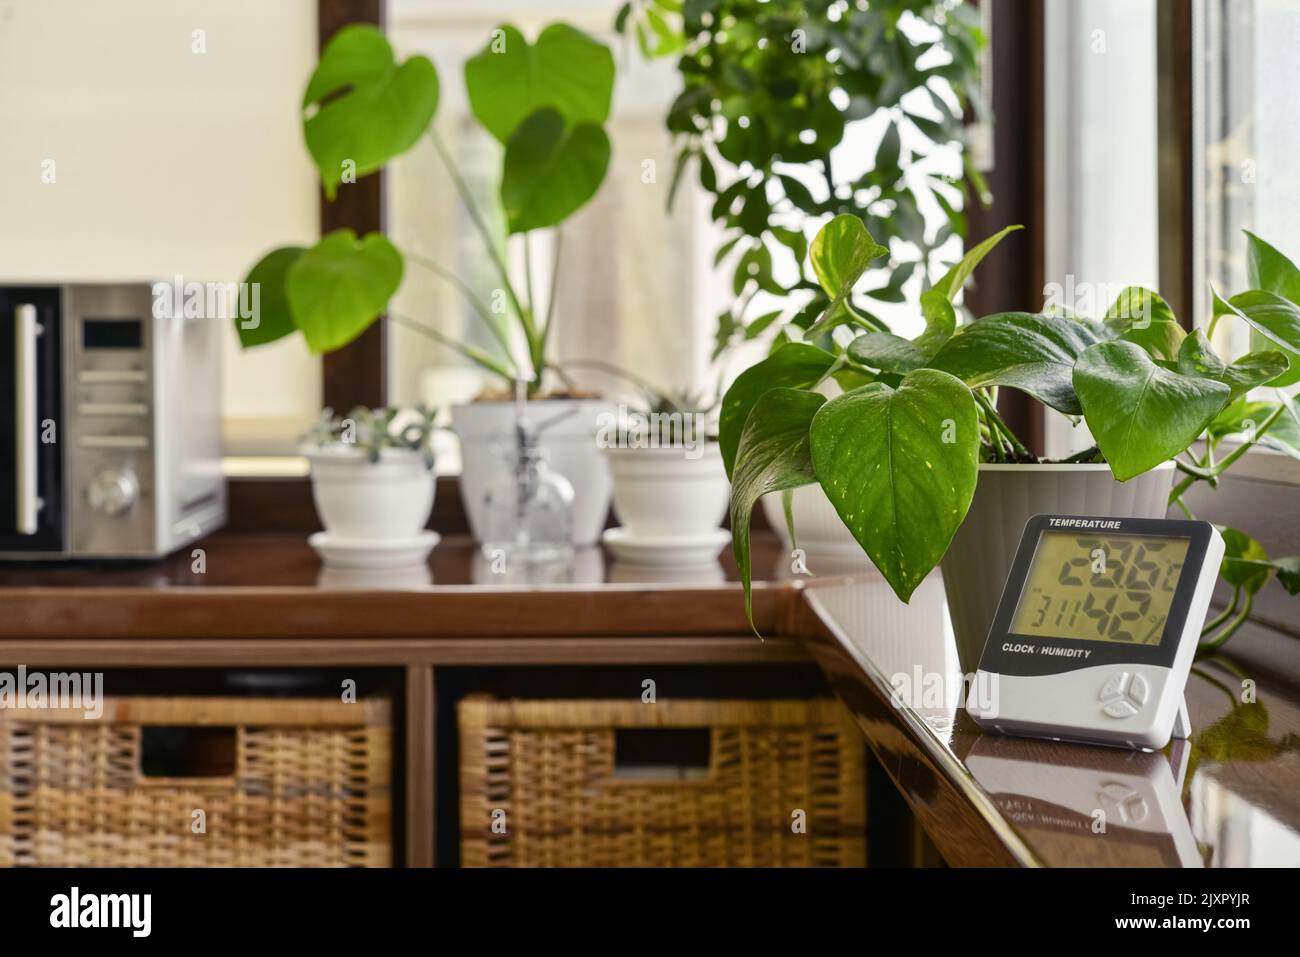 Thermometer hygrometer measuring the optimum temperature and humidity in a house on windowsill with houseplants closeup Stock Photo